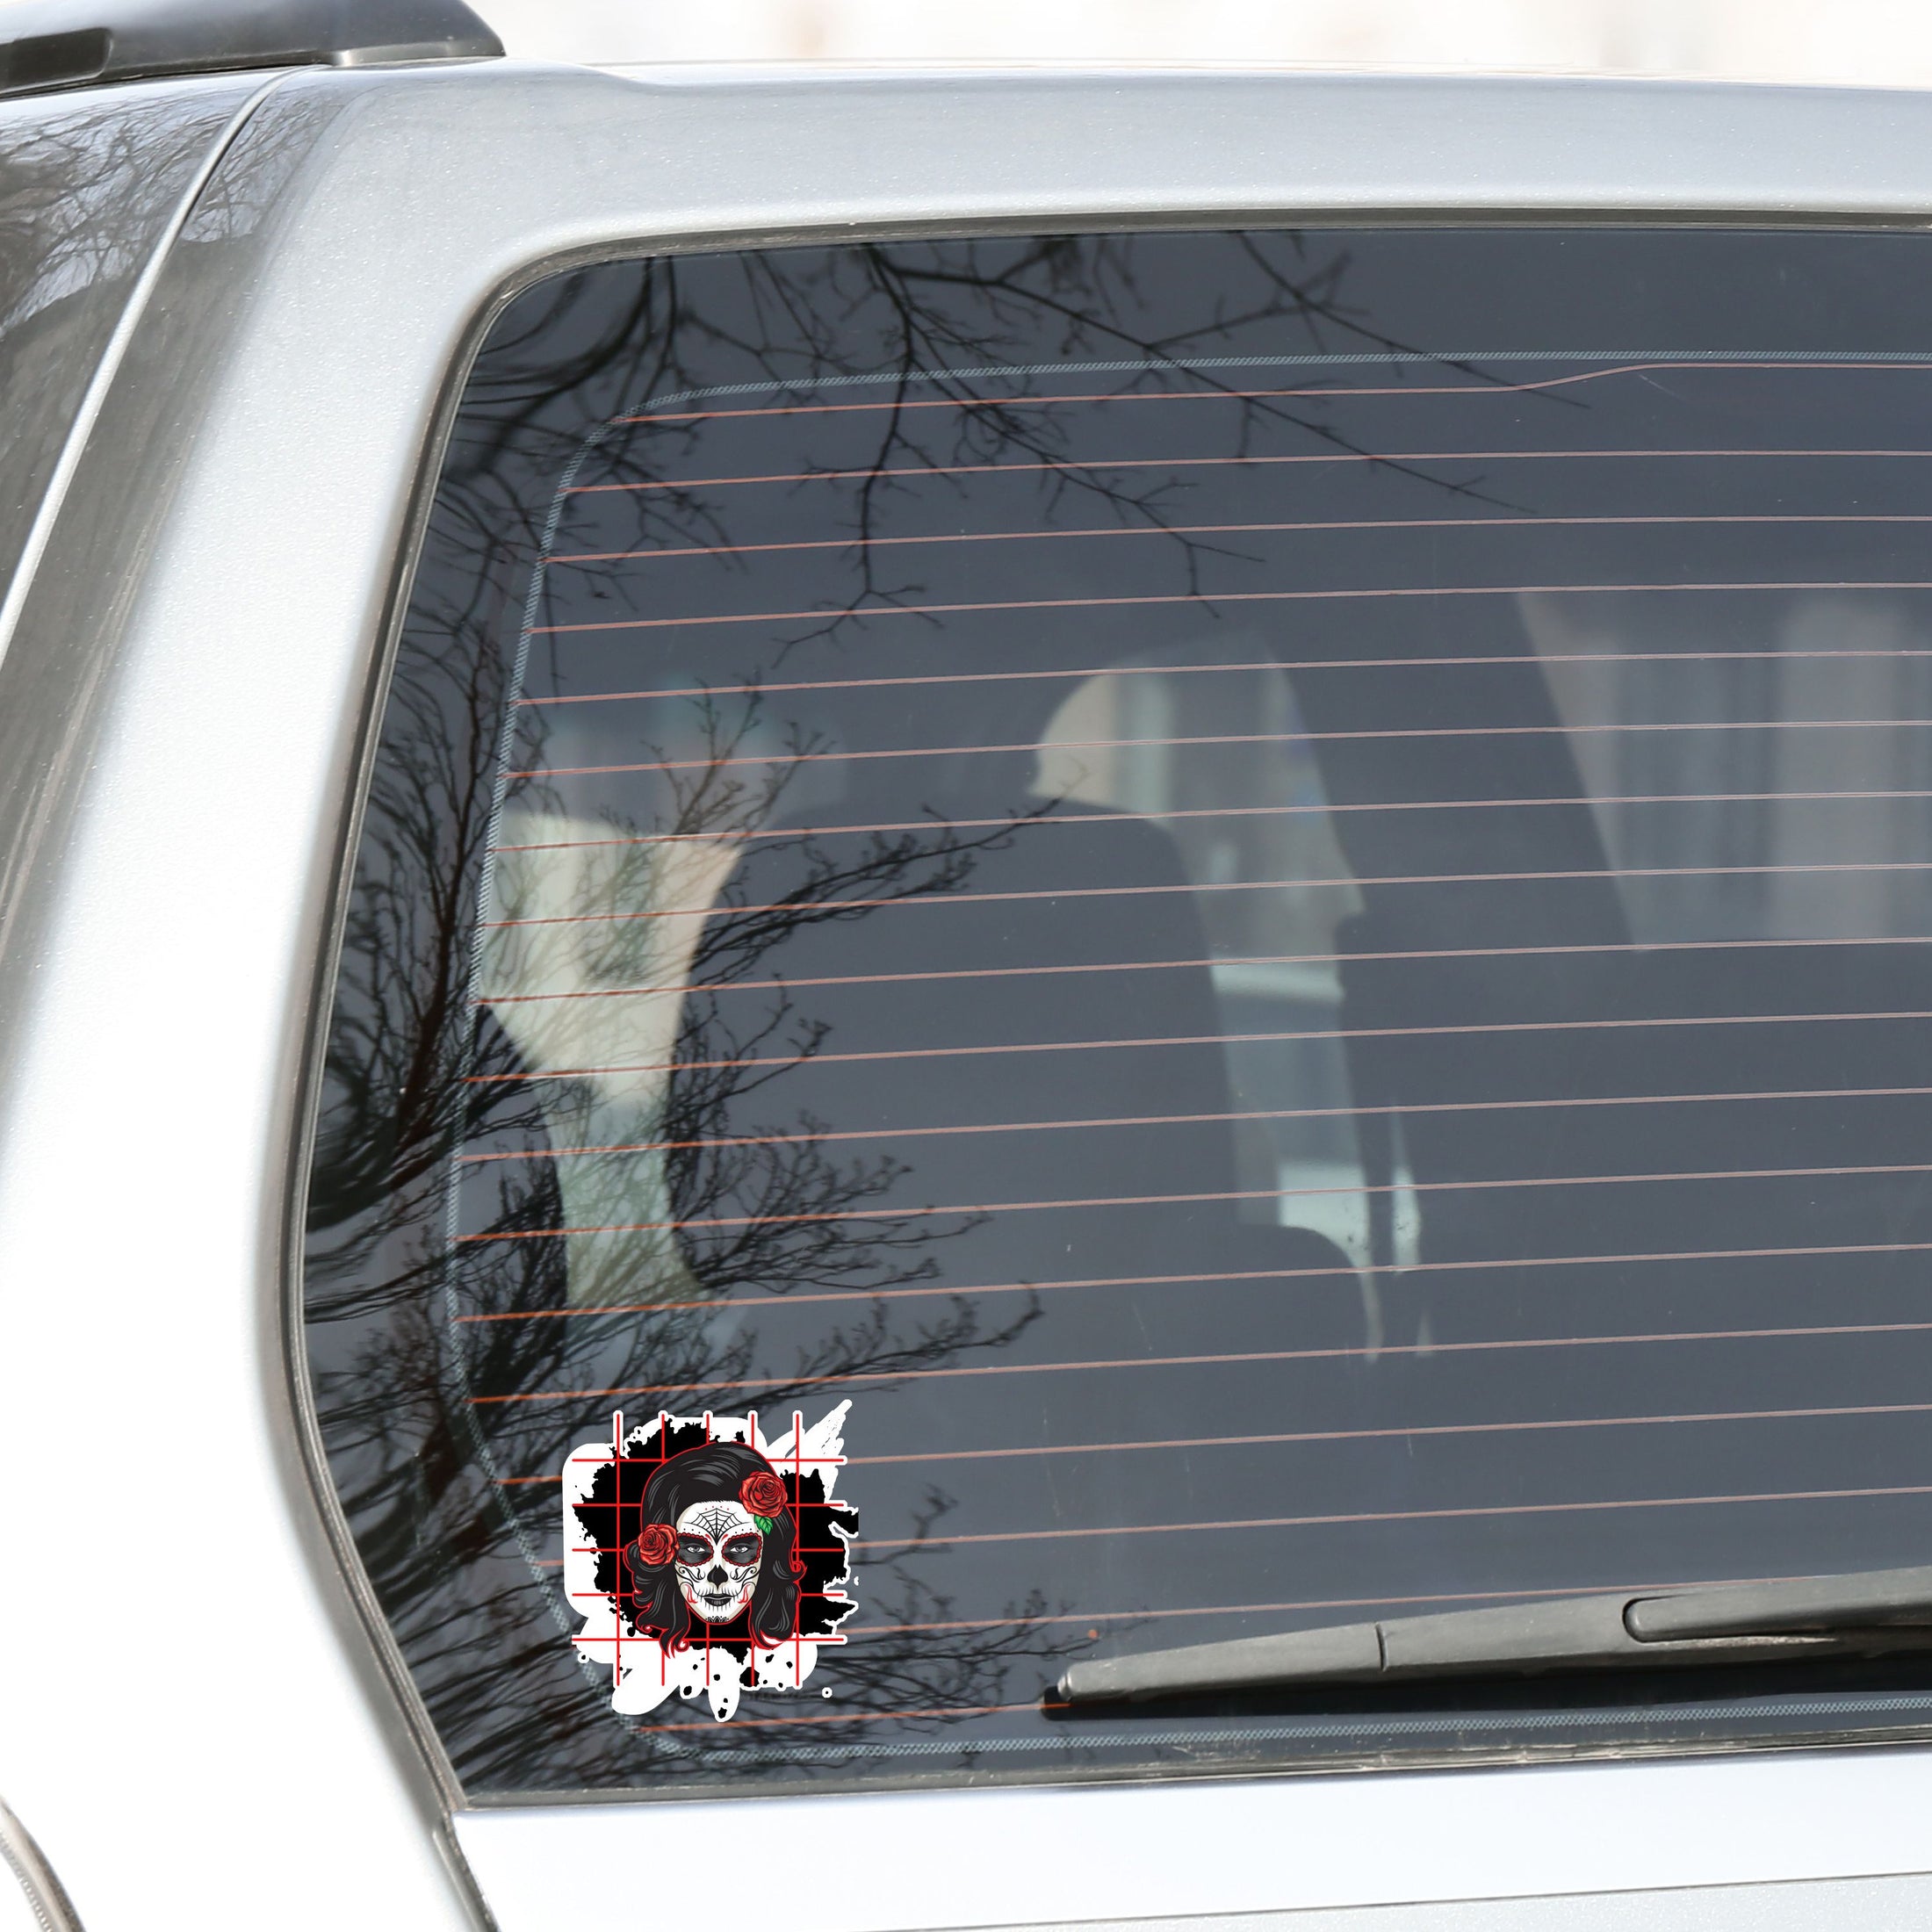 Trash Polka uses red, black, and white with a combination of abstract, surrealistic, and realistic images, and this individual die-cut sticker features a sugar skull woman with roses in her hair on a black background with a red grid. This image shows the trash polka sugar skull sticker on the back window of a car.